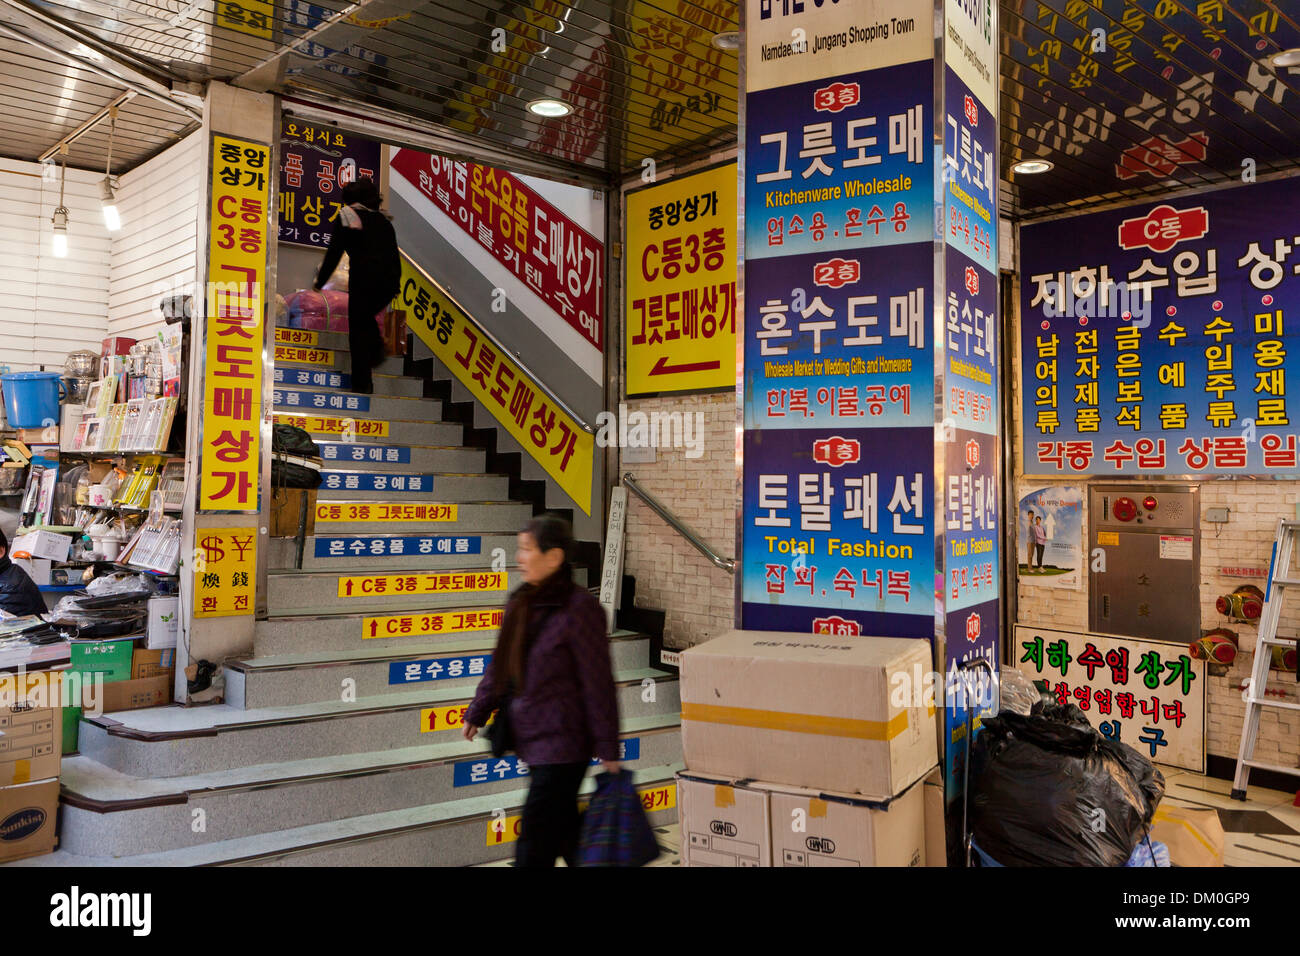 Advertisements and store signs on building entrance - Seoul, South Korea Stock Photo